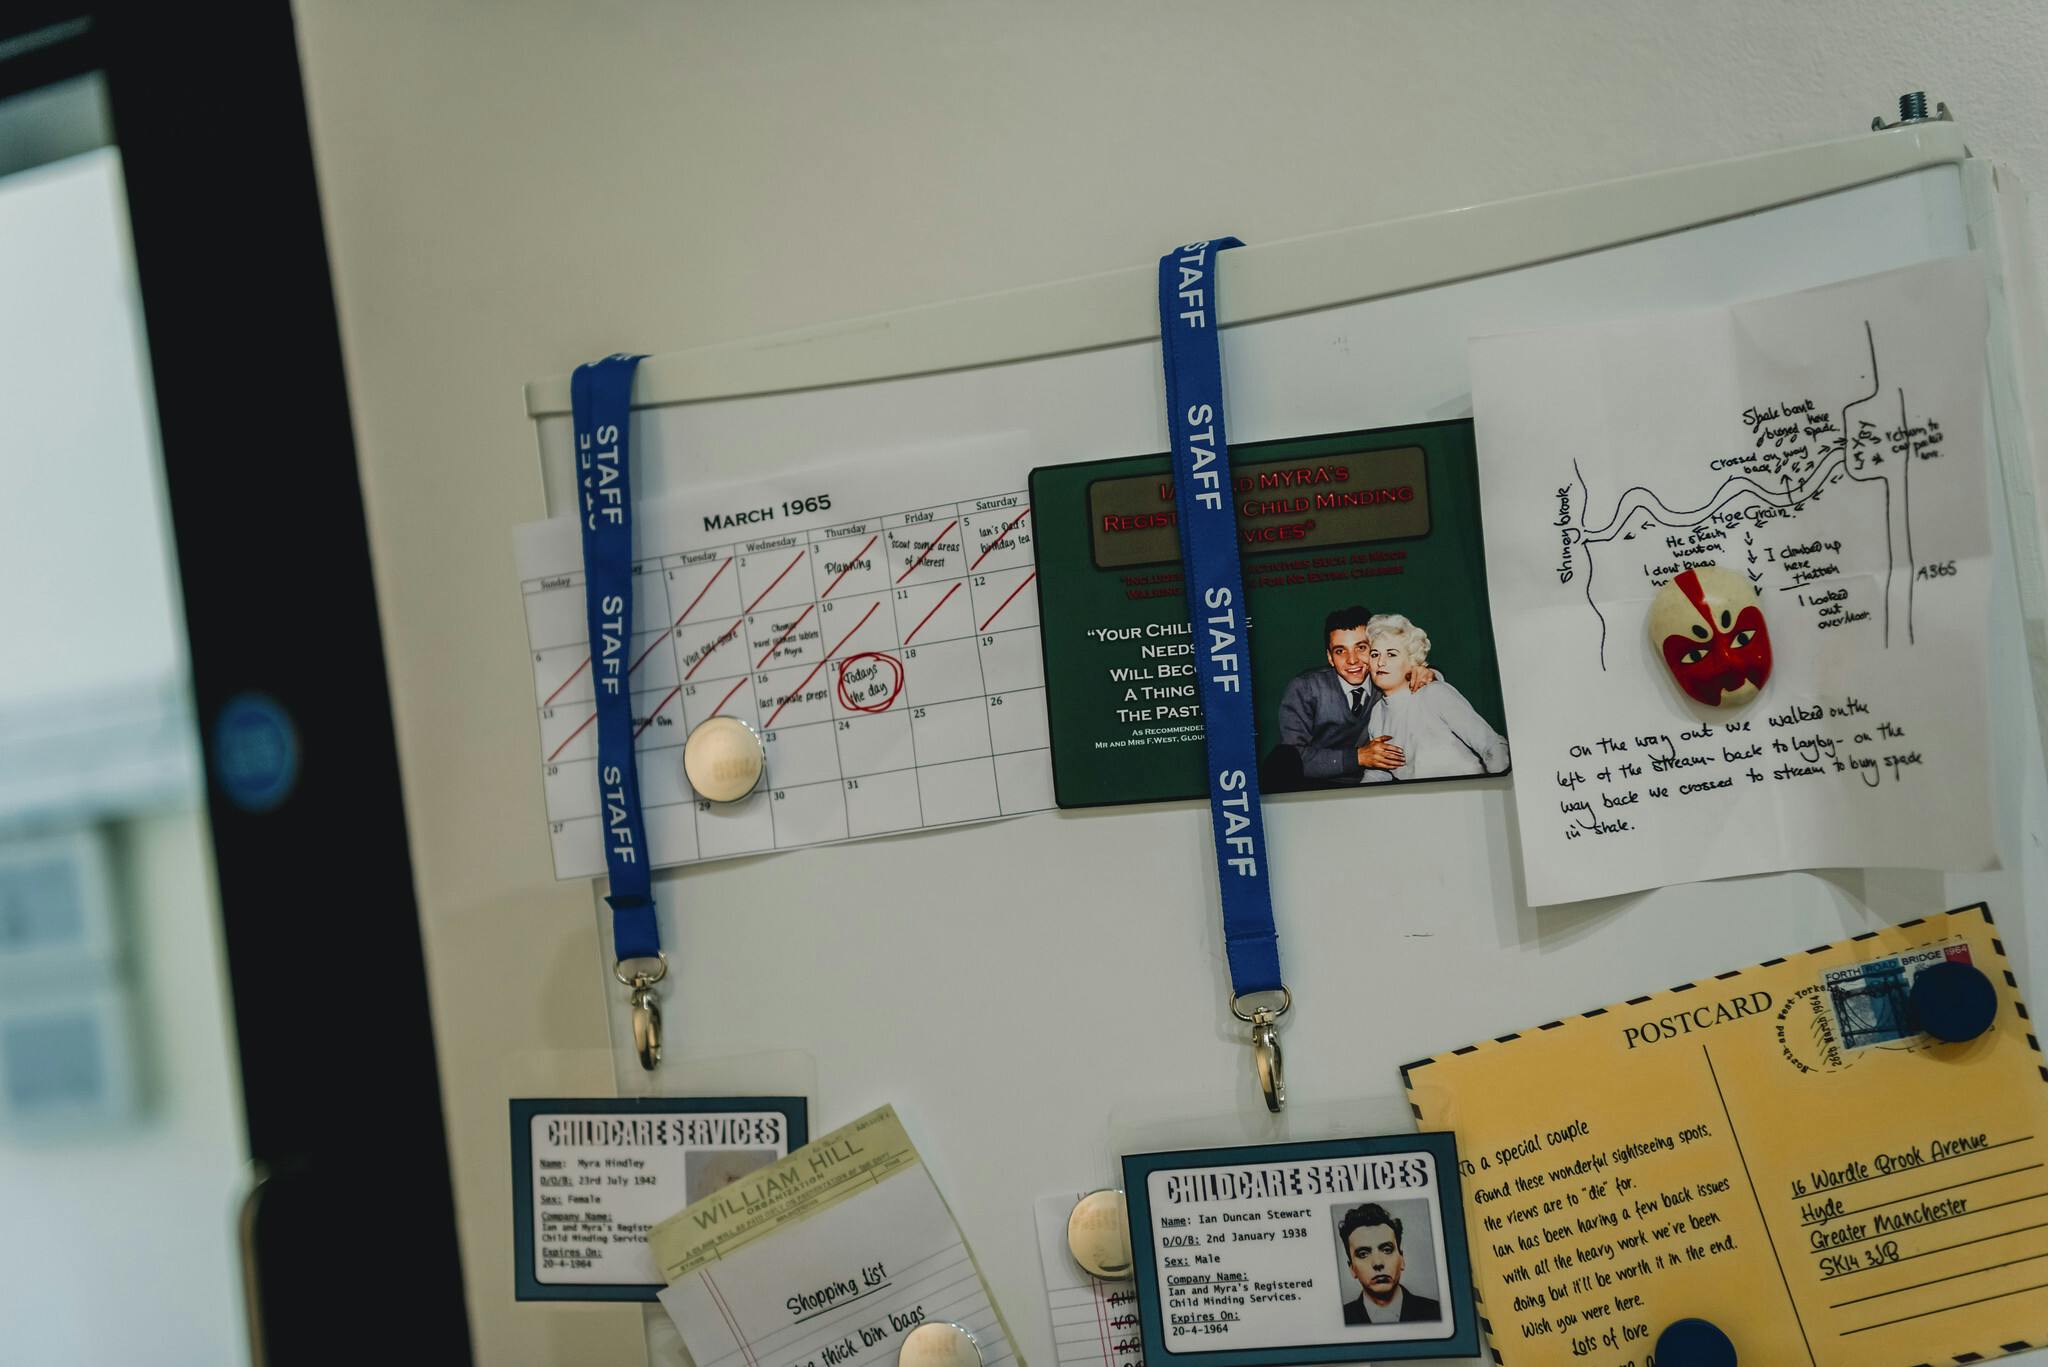 A fridge door shows magnets and hanging staff work cards on lanyards